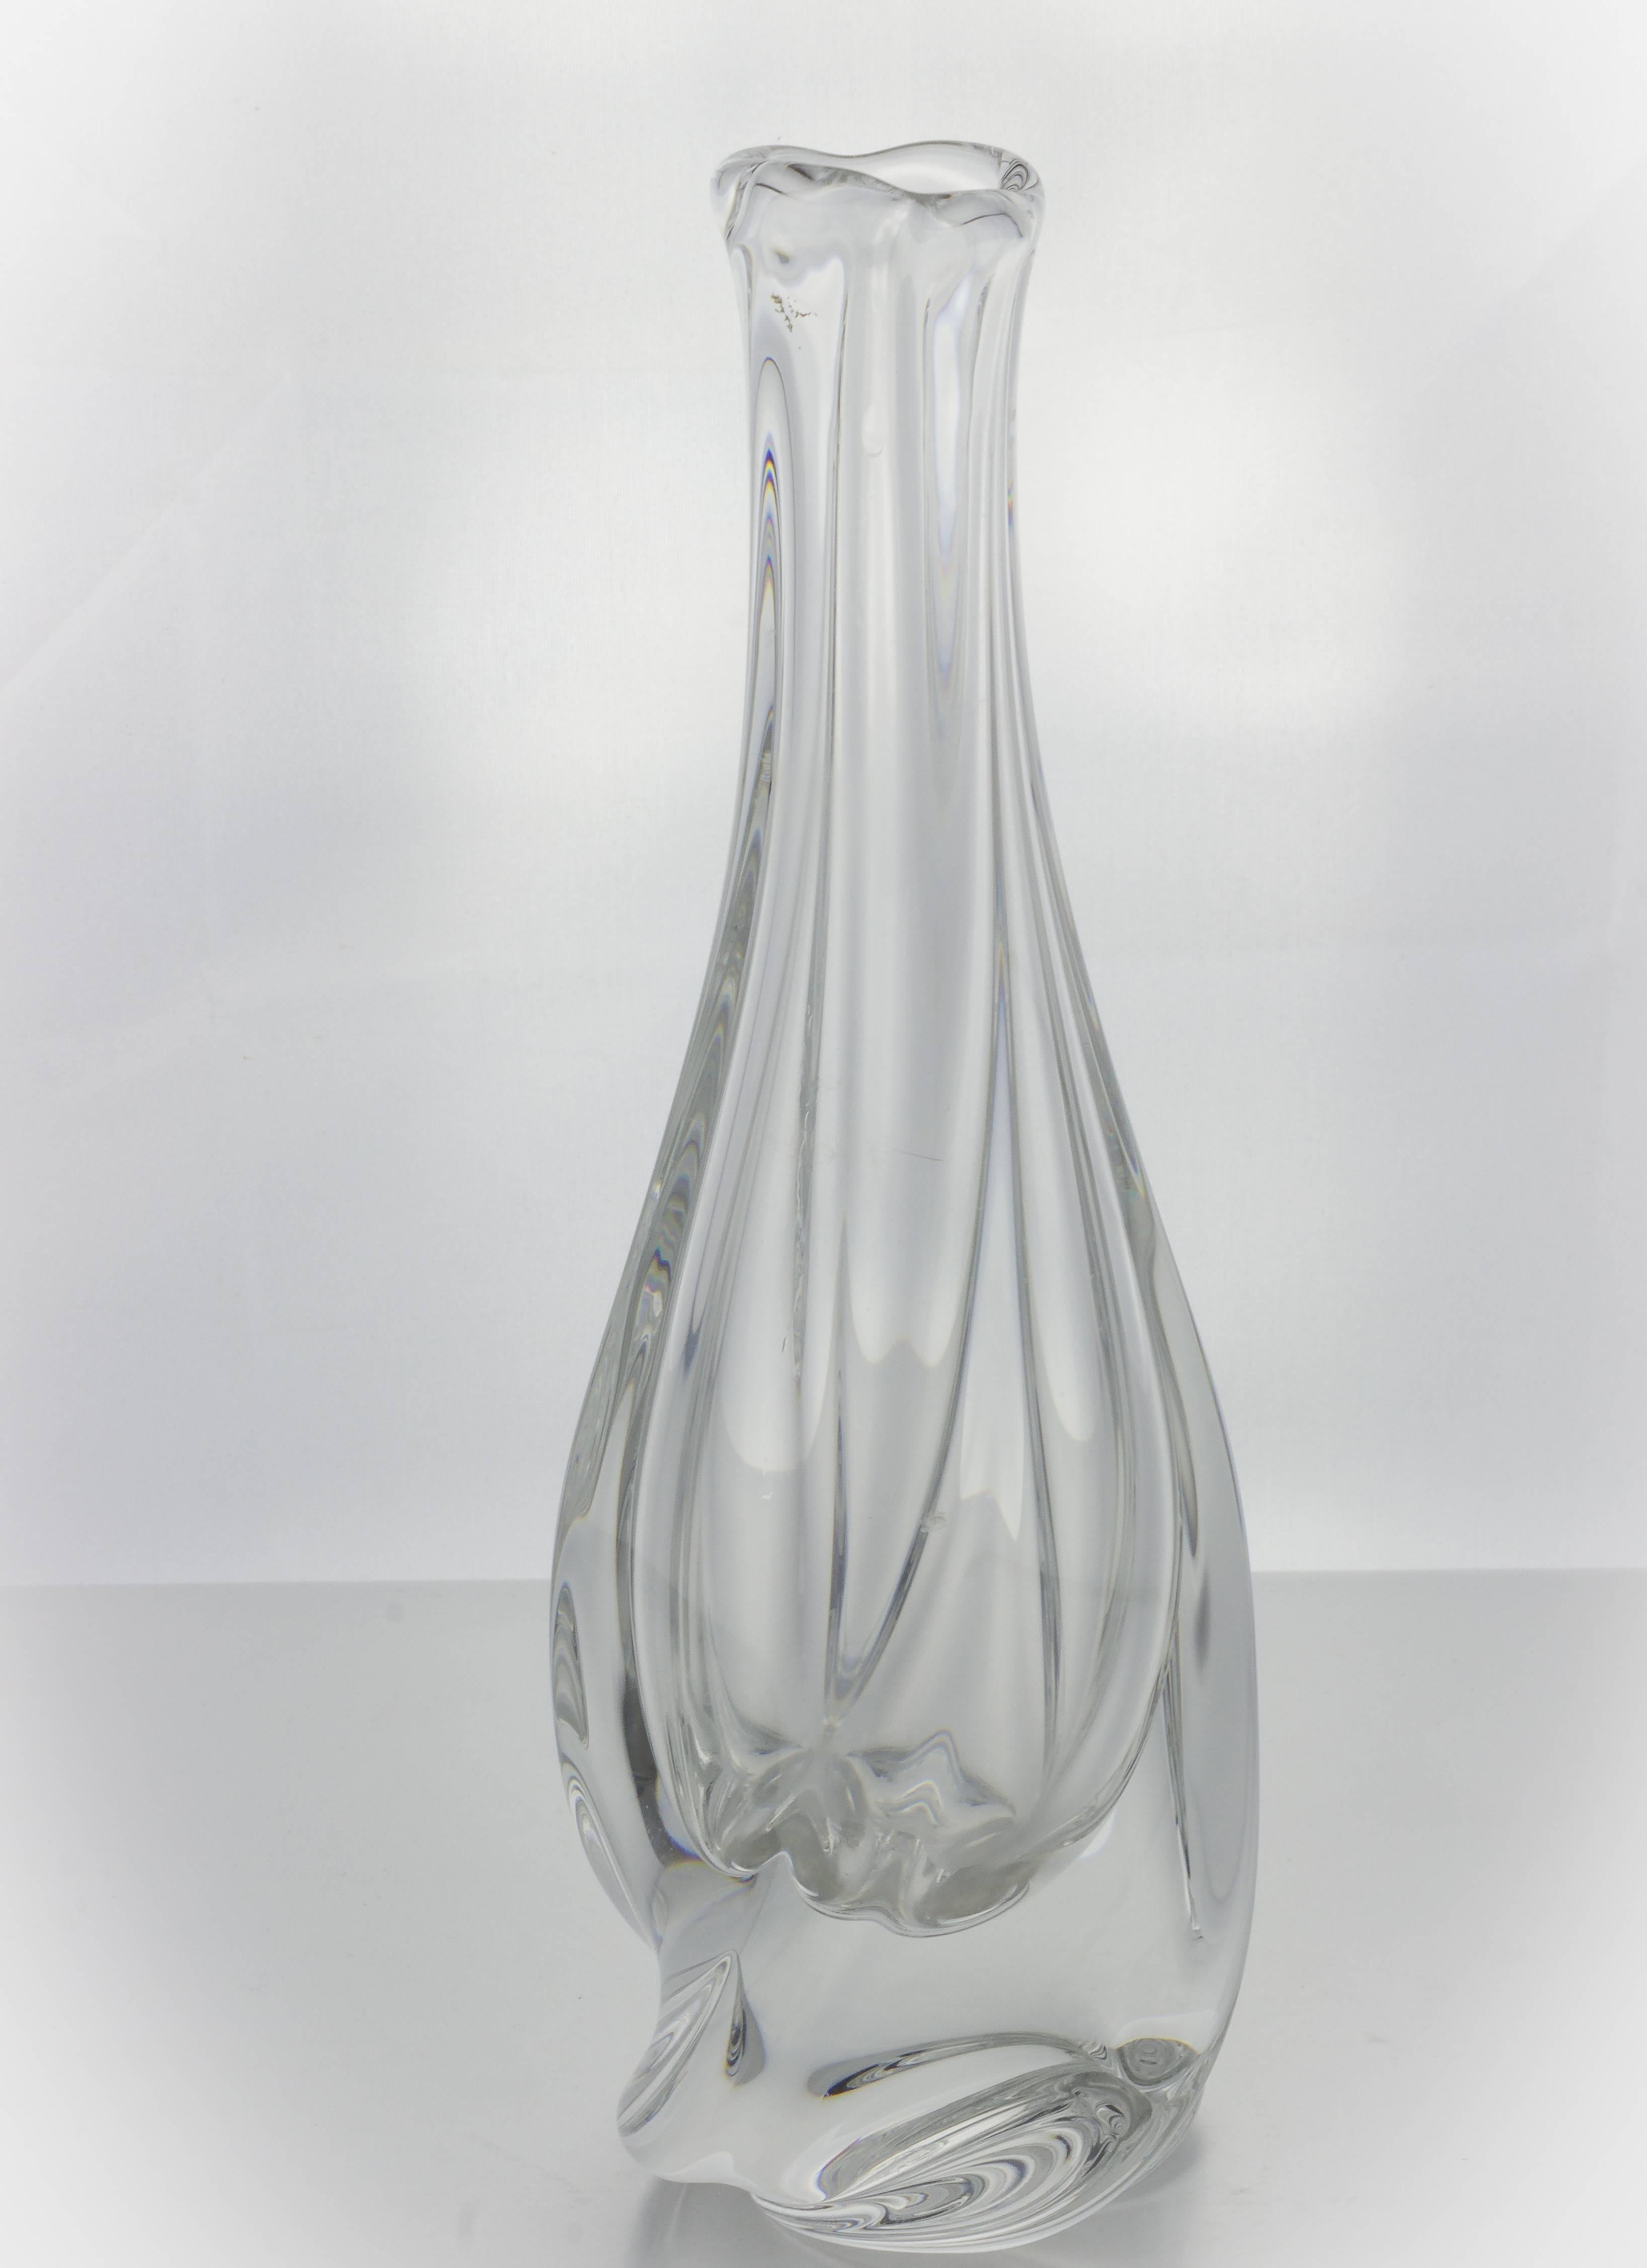 French crystal bud vase in a swirl pattern by St Louis.